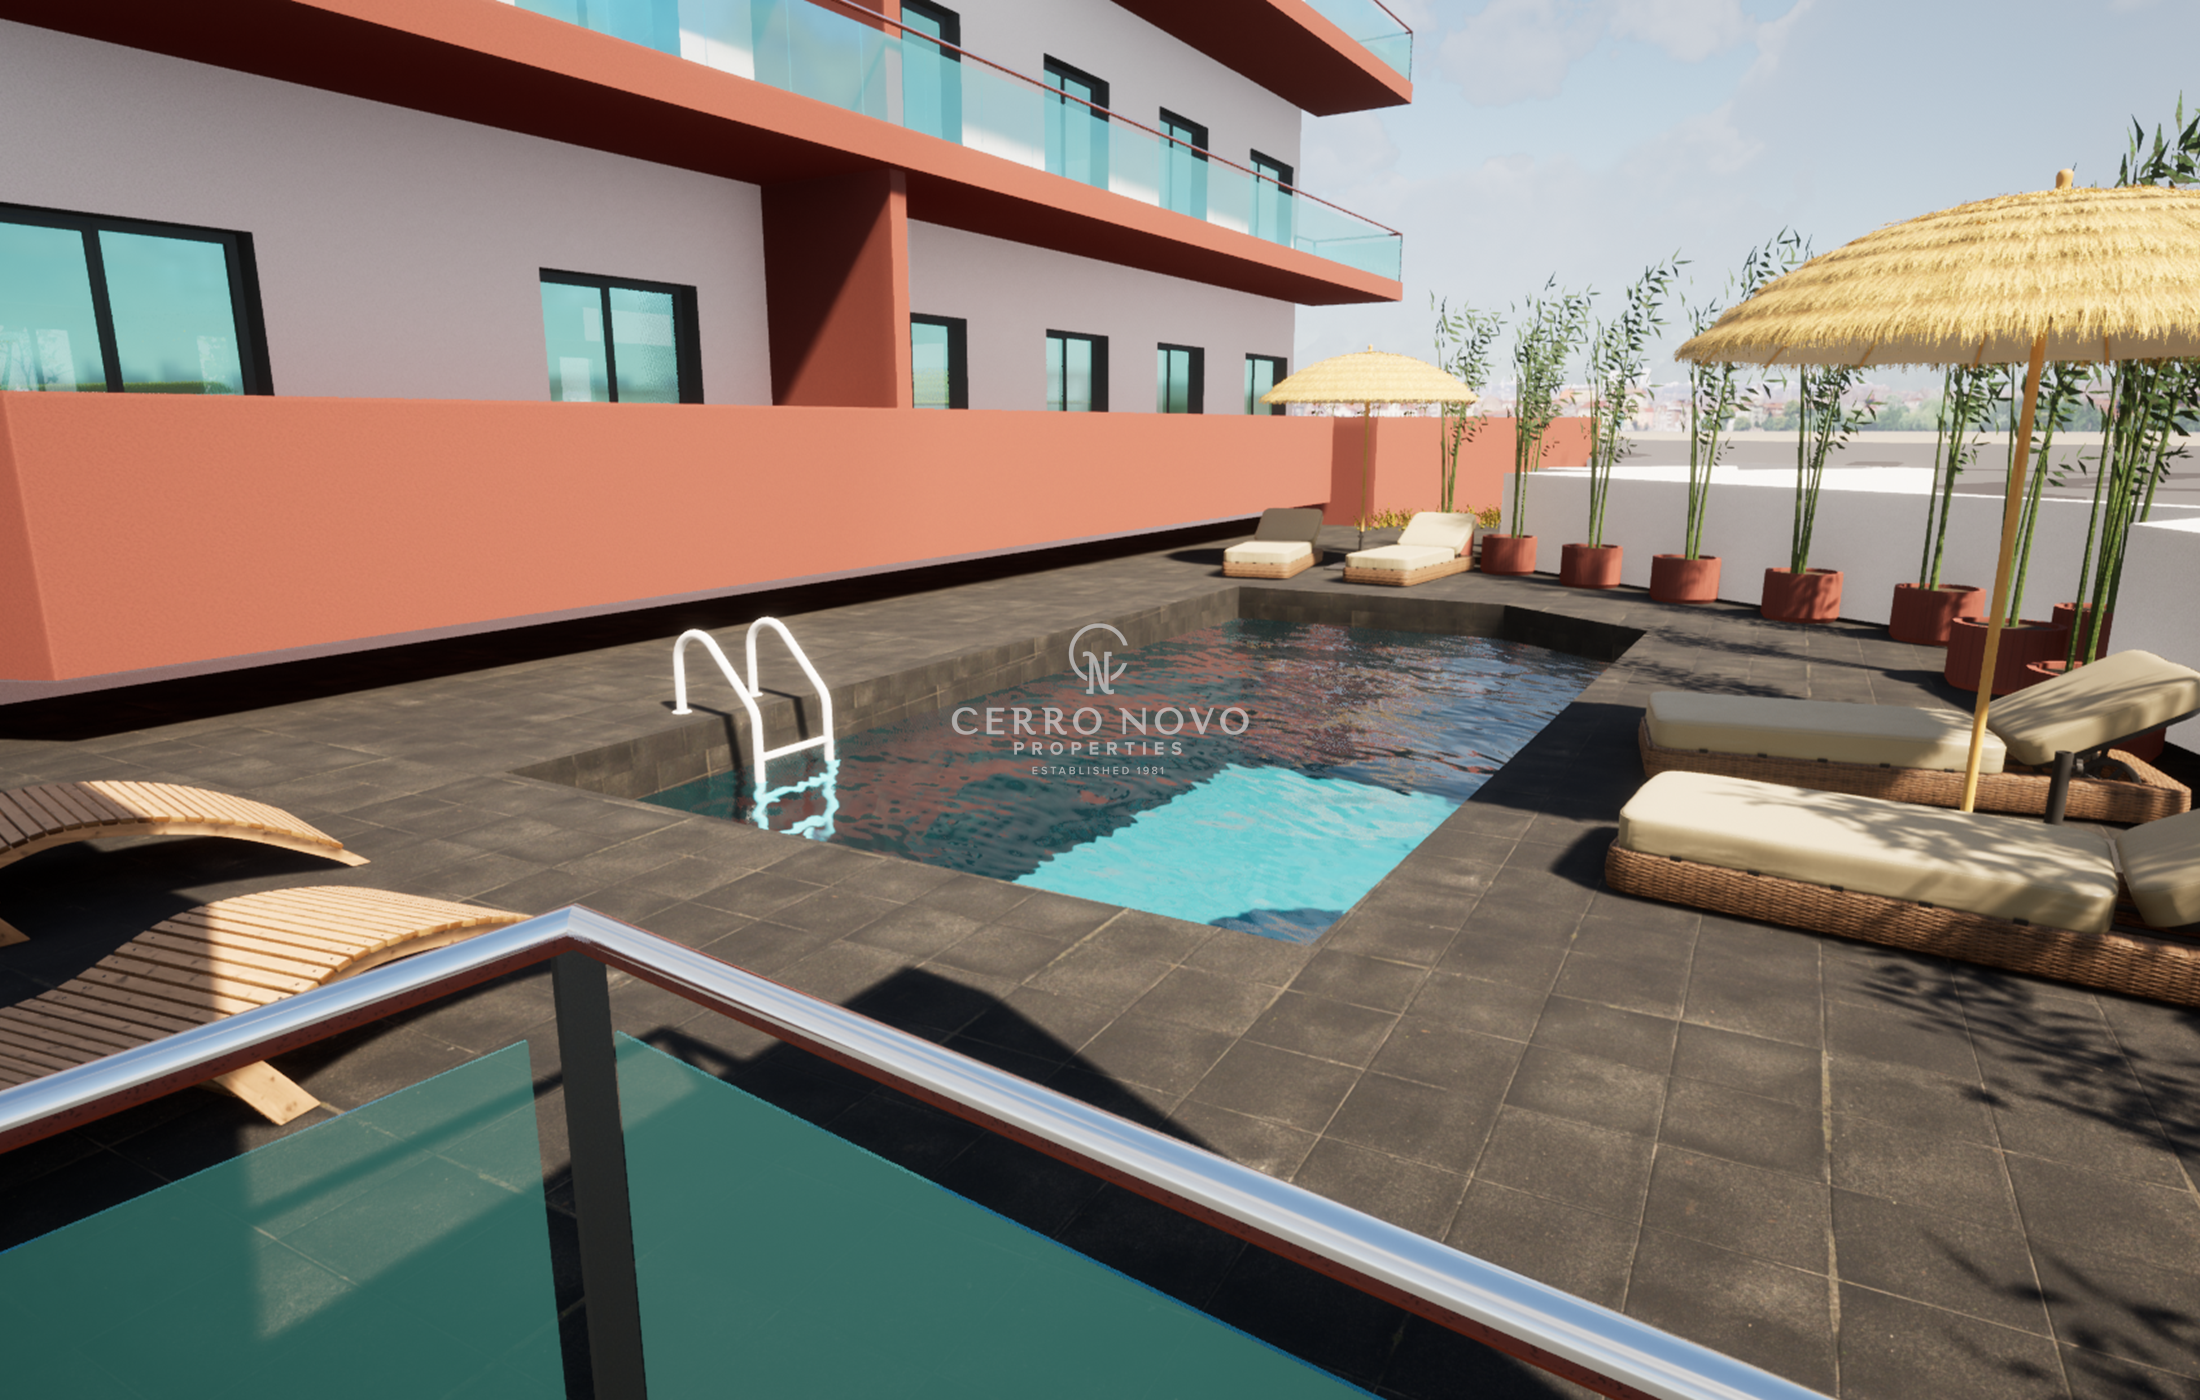 A brand new development with pool in the village of Pêra